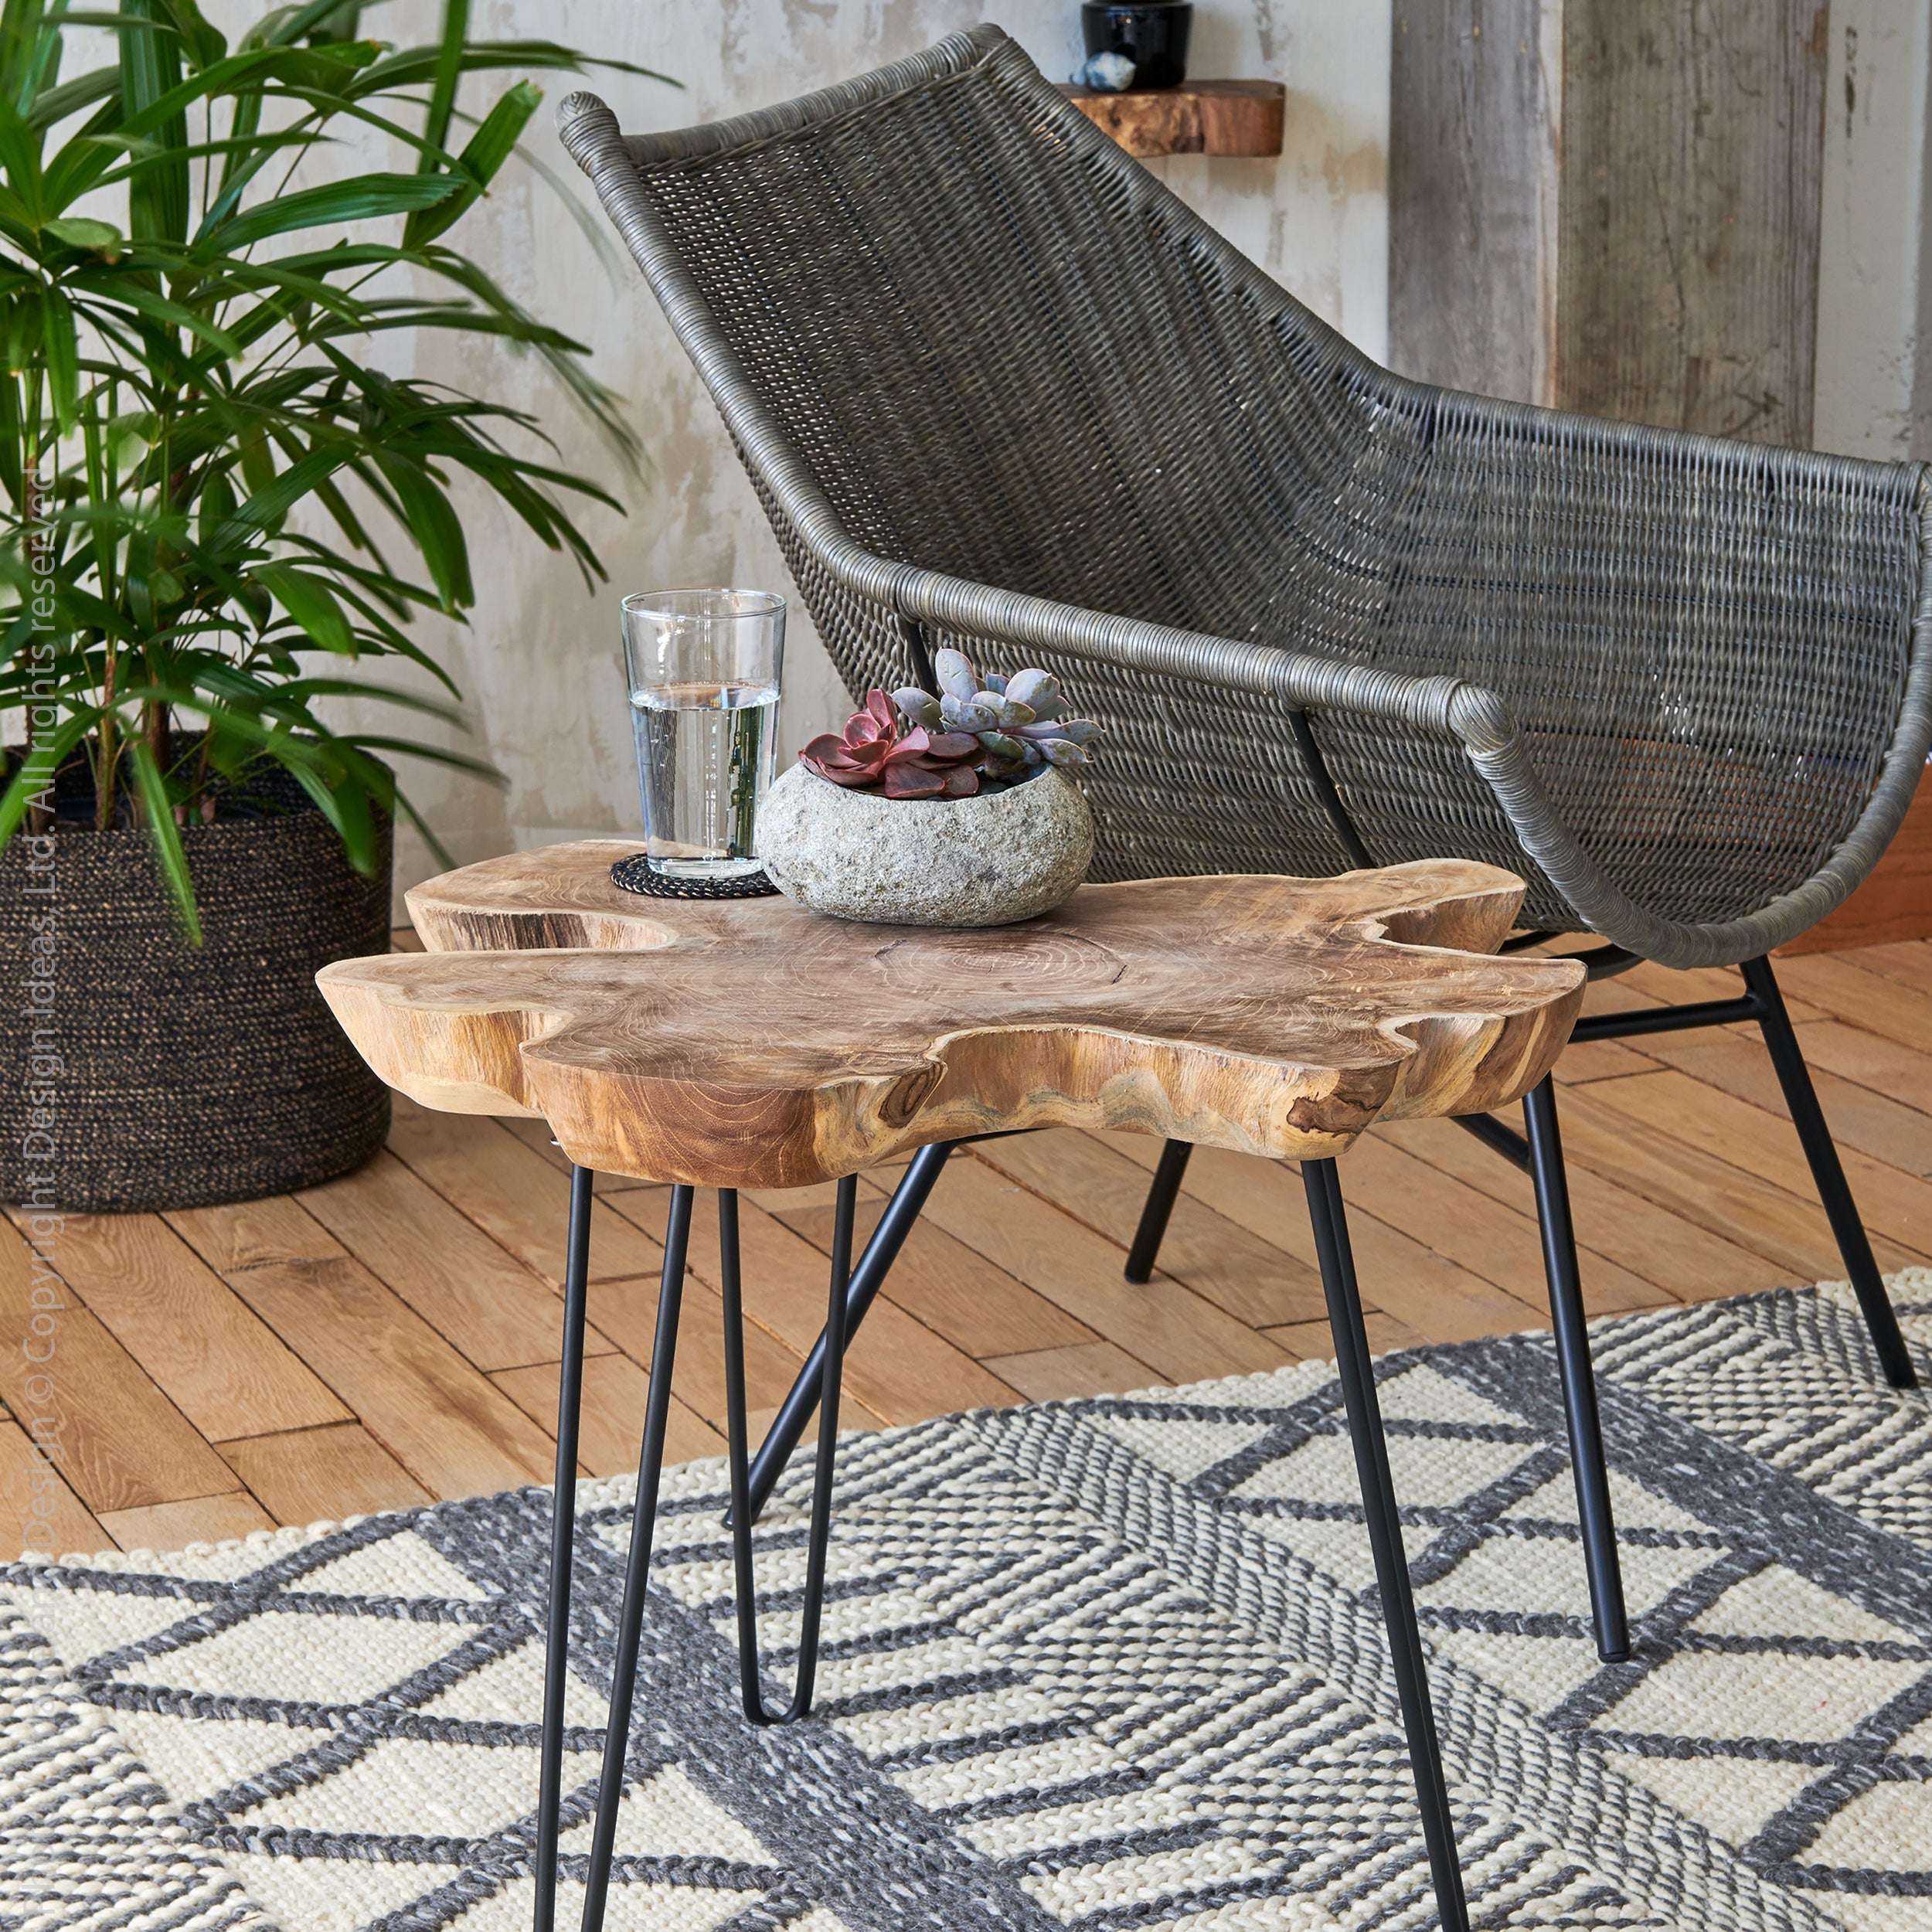 Kamala Rattan Lounge Chair Natural Color | Image 2 | From the Kamala Collection | Exquisitely created with natural rattan for long lasting use | texxture home